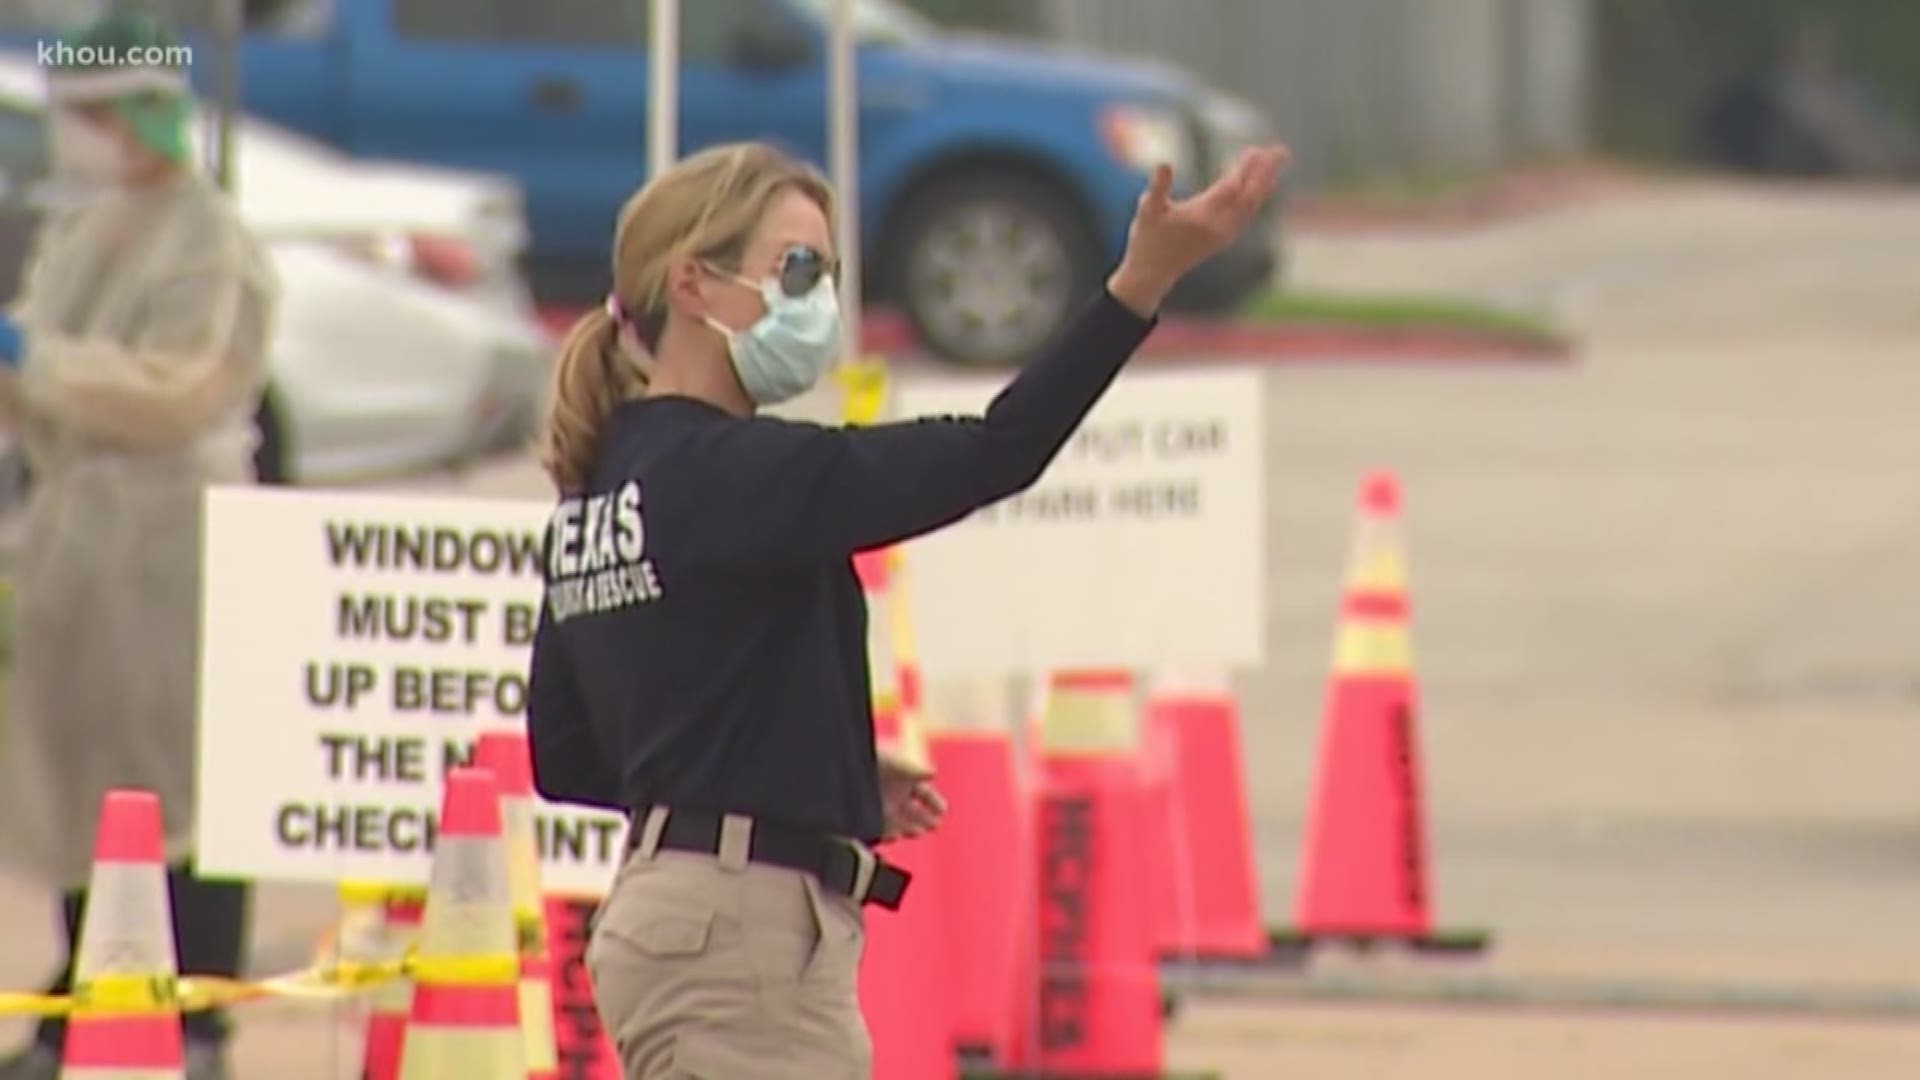 Mobile coronavirus testing sites are coming to the Tomball and Humble area starting this week, the Harris County Pct. 4 Commissioner's Office confirmed Monday.